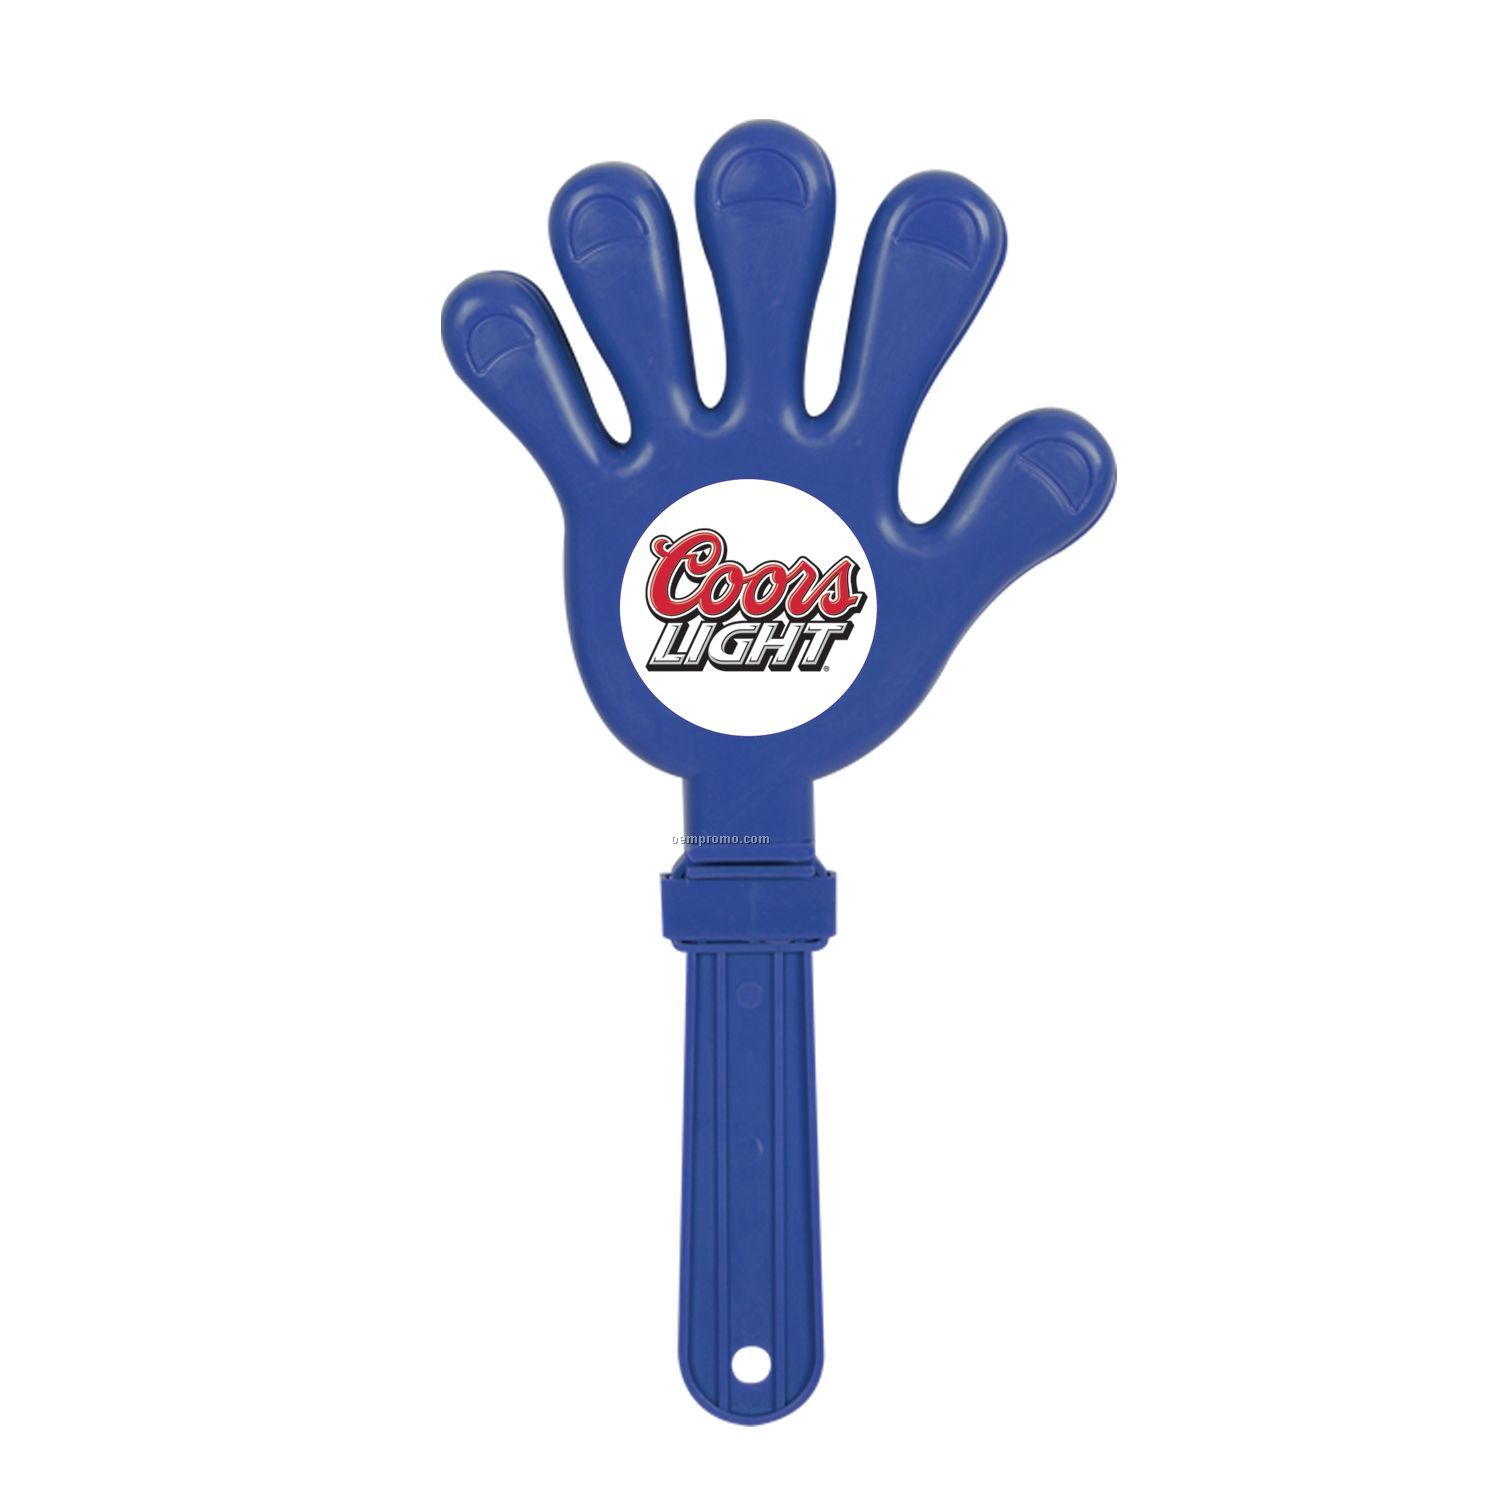 Imprinted 15" Giant Hand Clapper